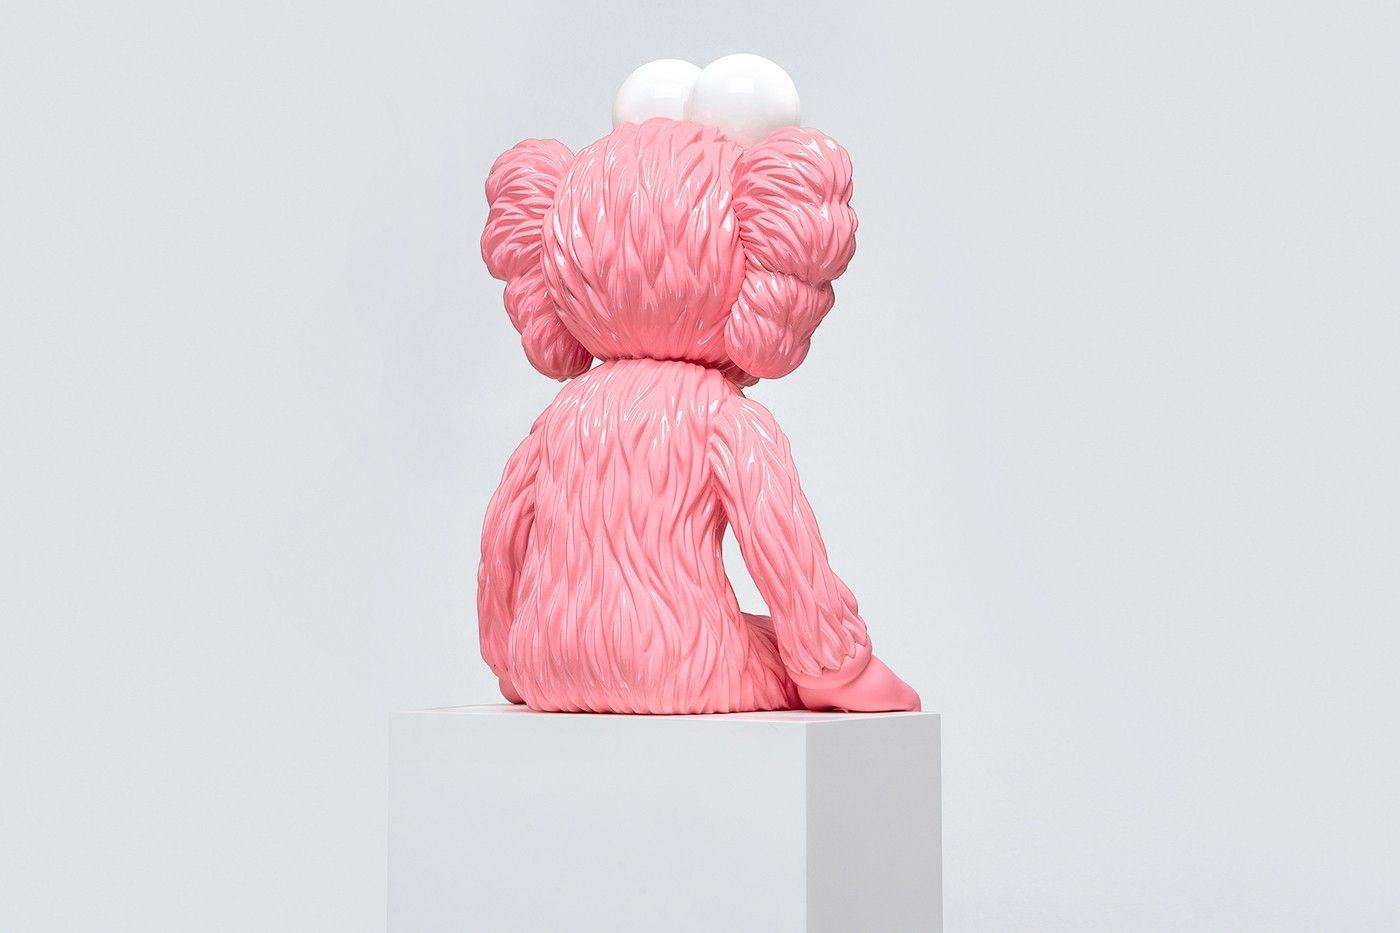 SEEING Pink With KAWS' 'BFF'. Kaws wallpaper, Pink wallpaper iphone, Hype wallpaper